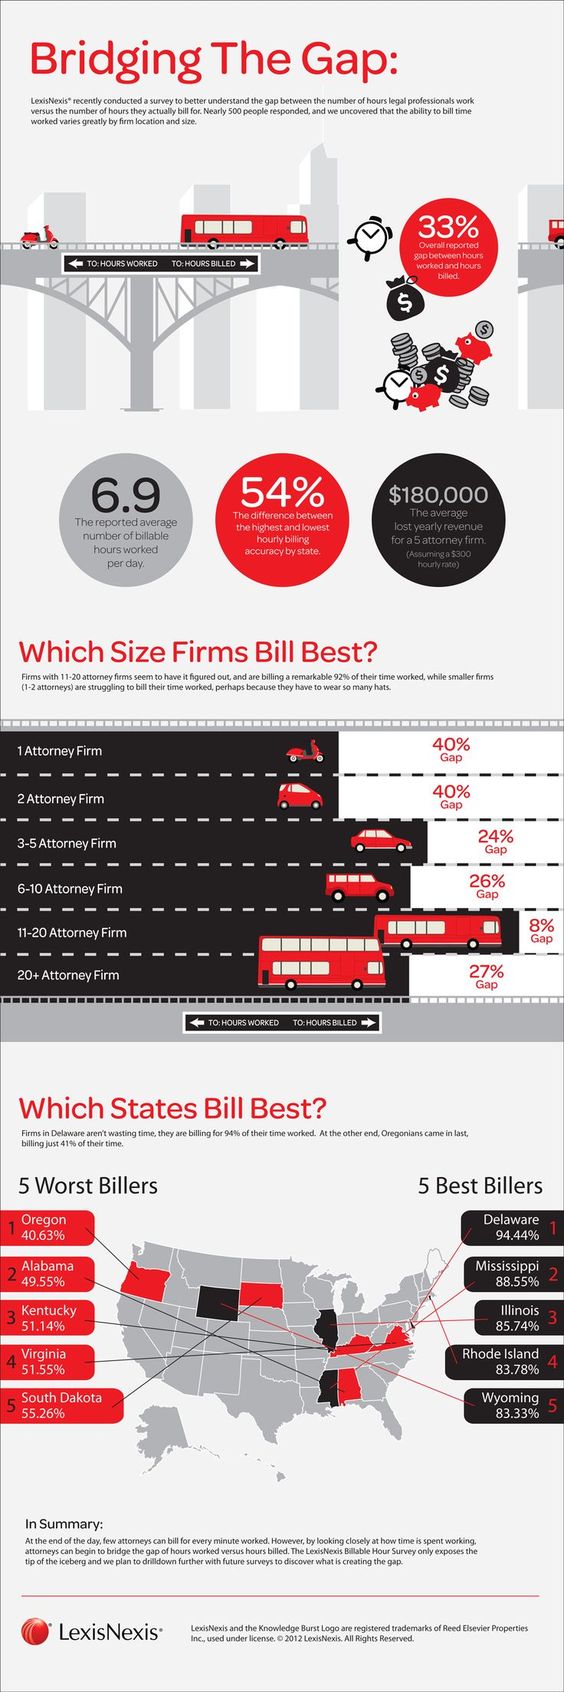 Law Firm Survey Results Infographic  Filed under:  This infographic from LexisNexis shows the results of a nationwide survey of law firms and the analysis of lawyer hours worked versus hours billed. This is an interesting piece for those who have used lawyers or want to become a lawyer. The job of law firm management is to determine how they will bill clients and many are starting to use law billing software to get this do #lawfirm #marketing #howto #biztip #smallbiz